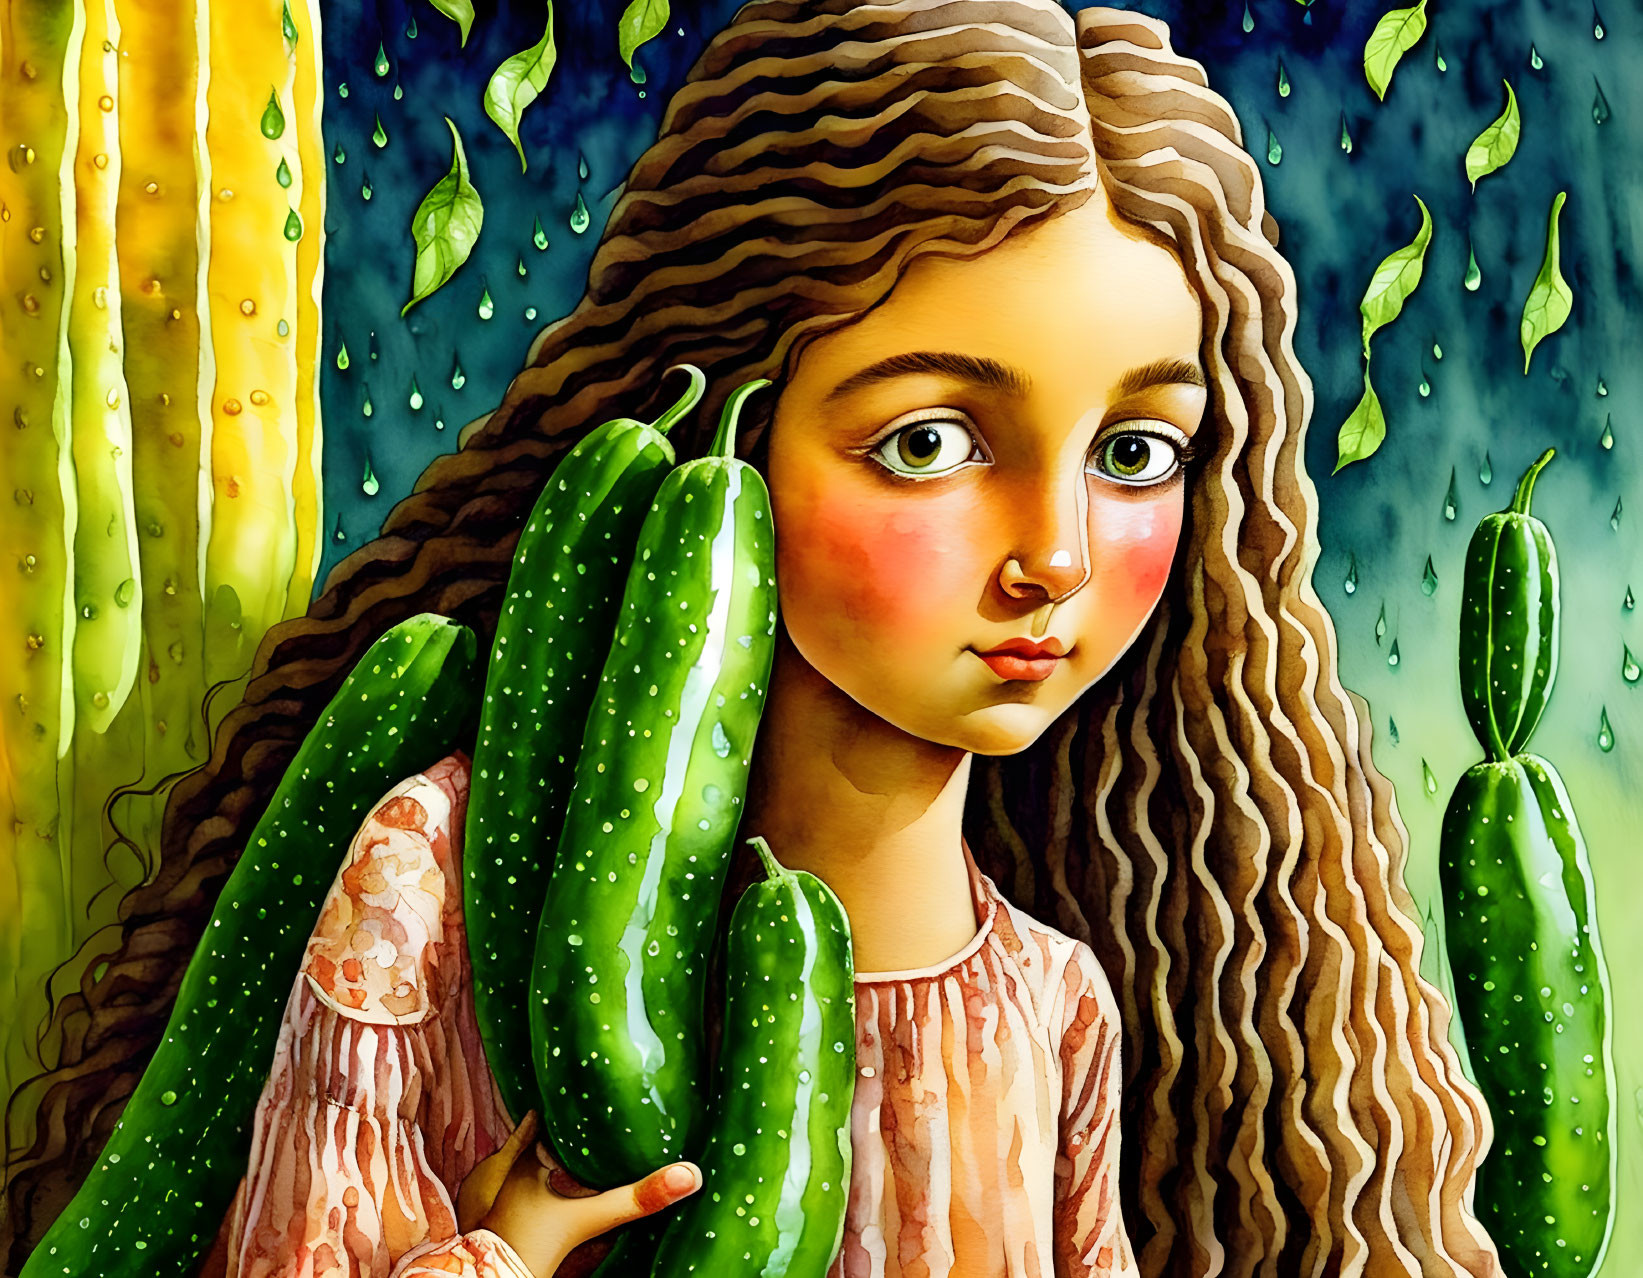 Stylized illustration of girl with curly cucumber hair in rainy backdrop